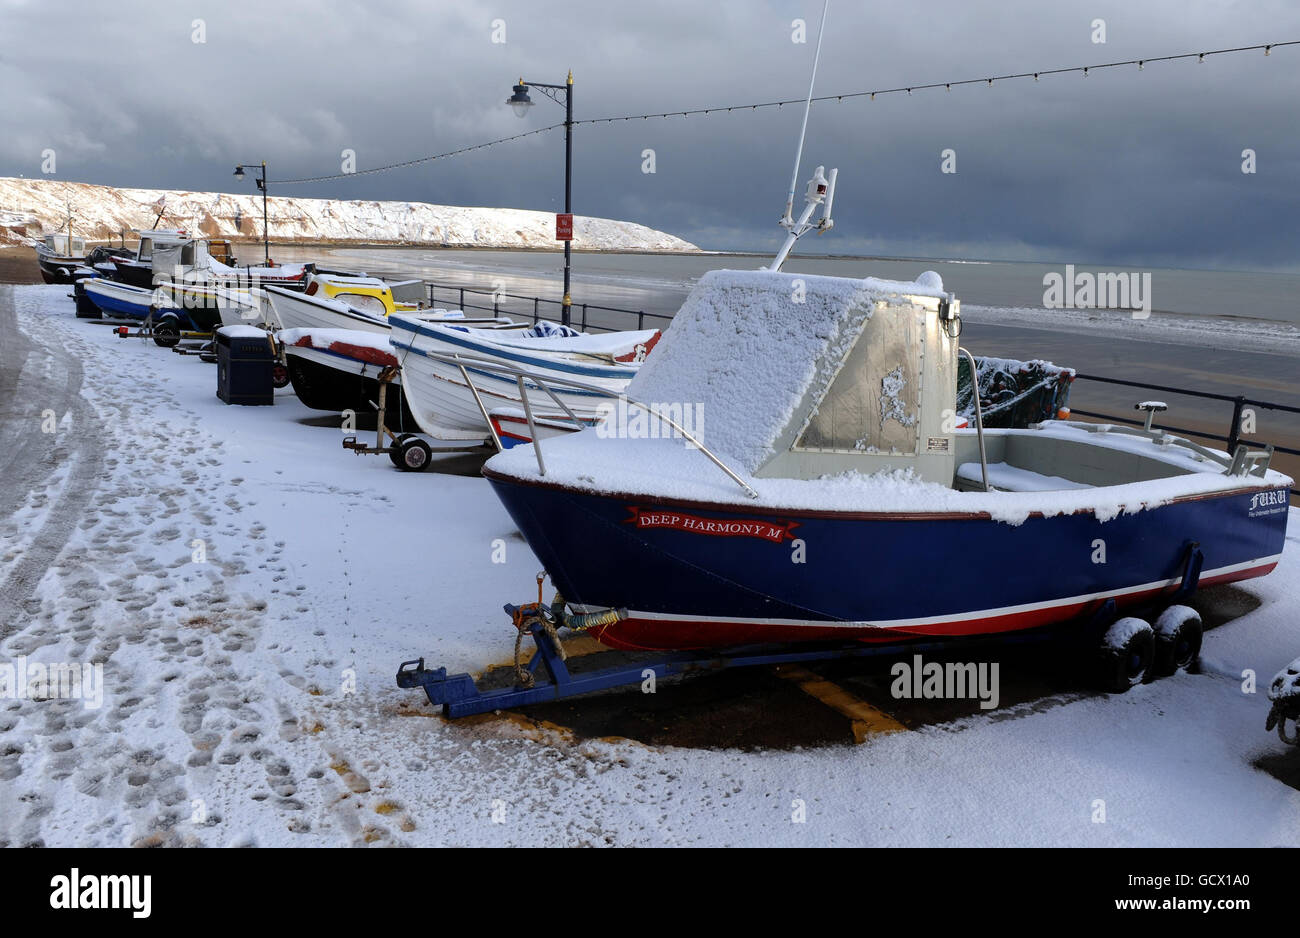 Fishing boats sit covered in snow on the beach in Filey, North Yorkshire, as more snowfalls are forecast along the east coast of the UK. Stock Photo